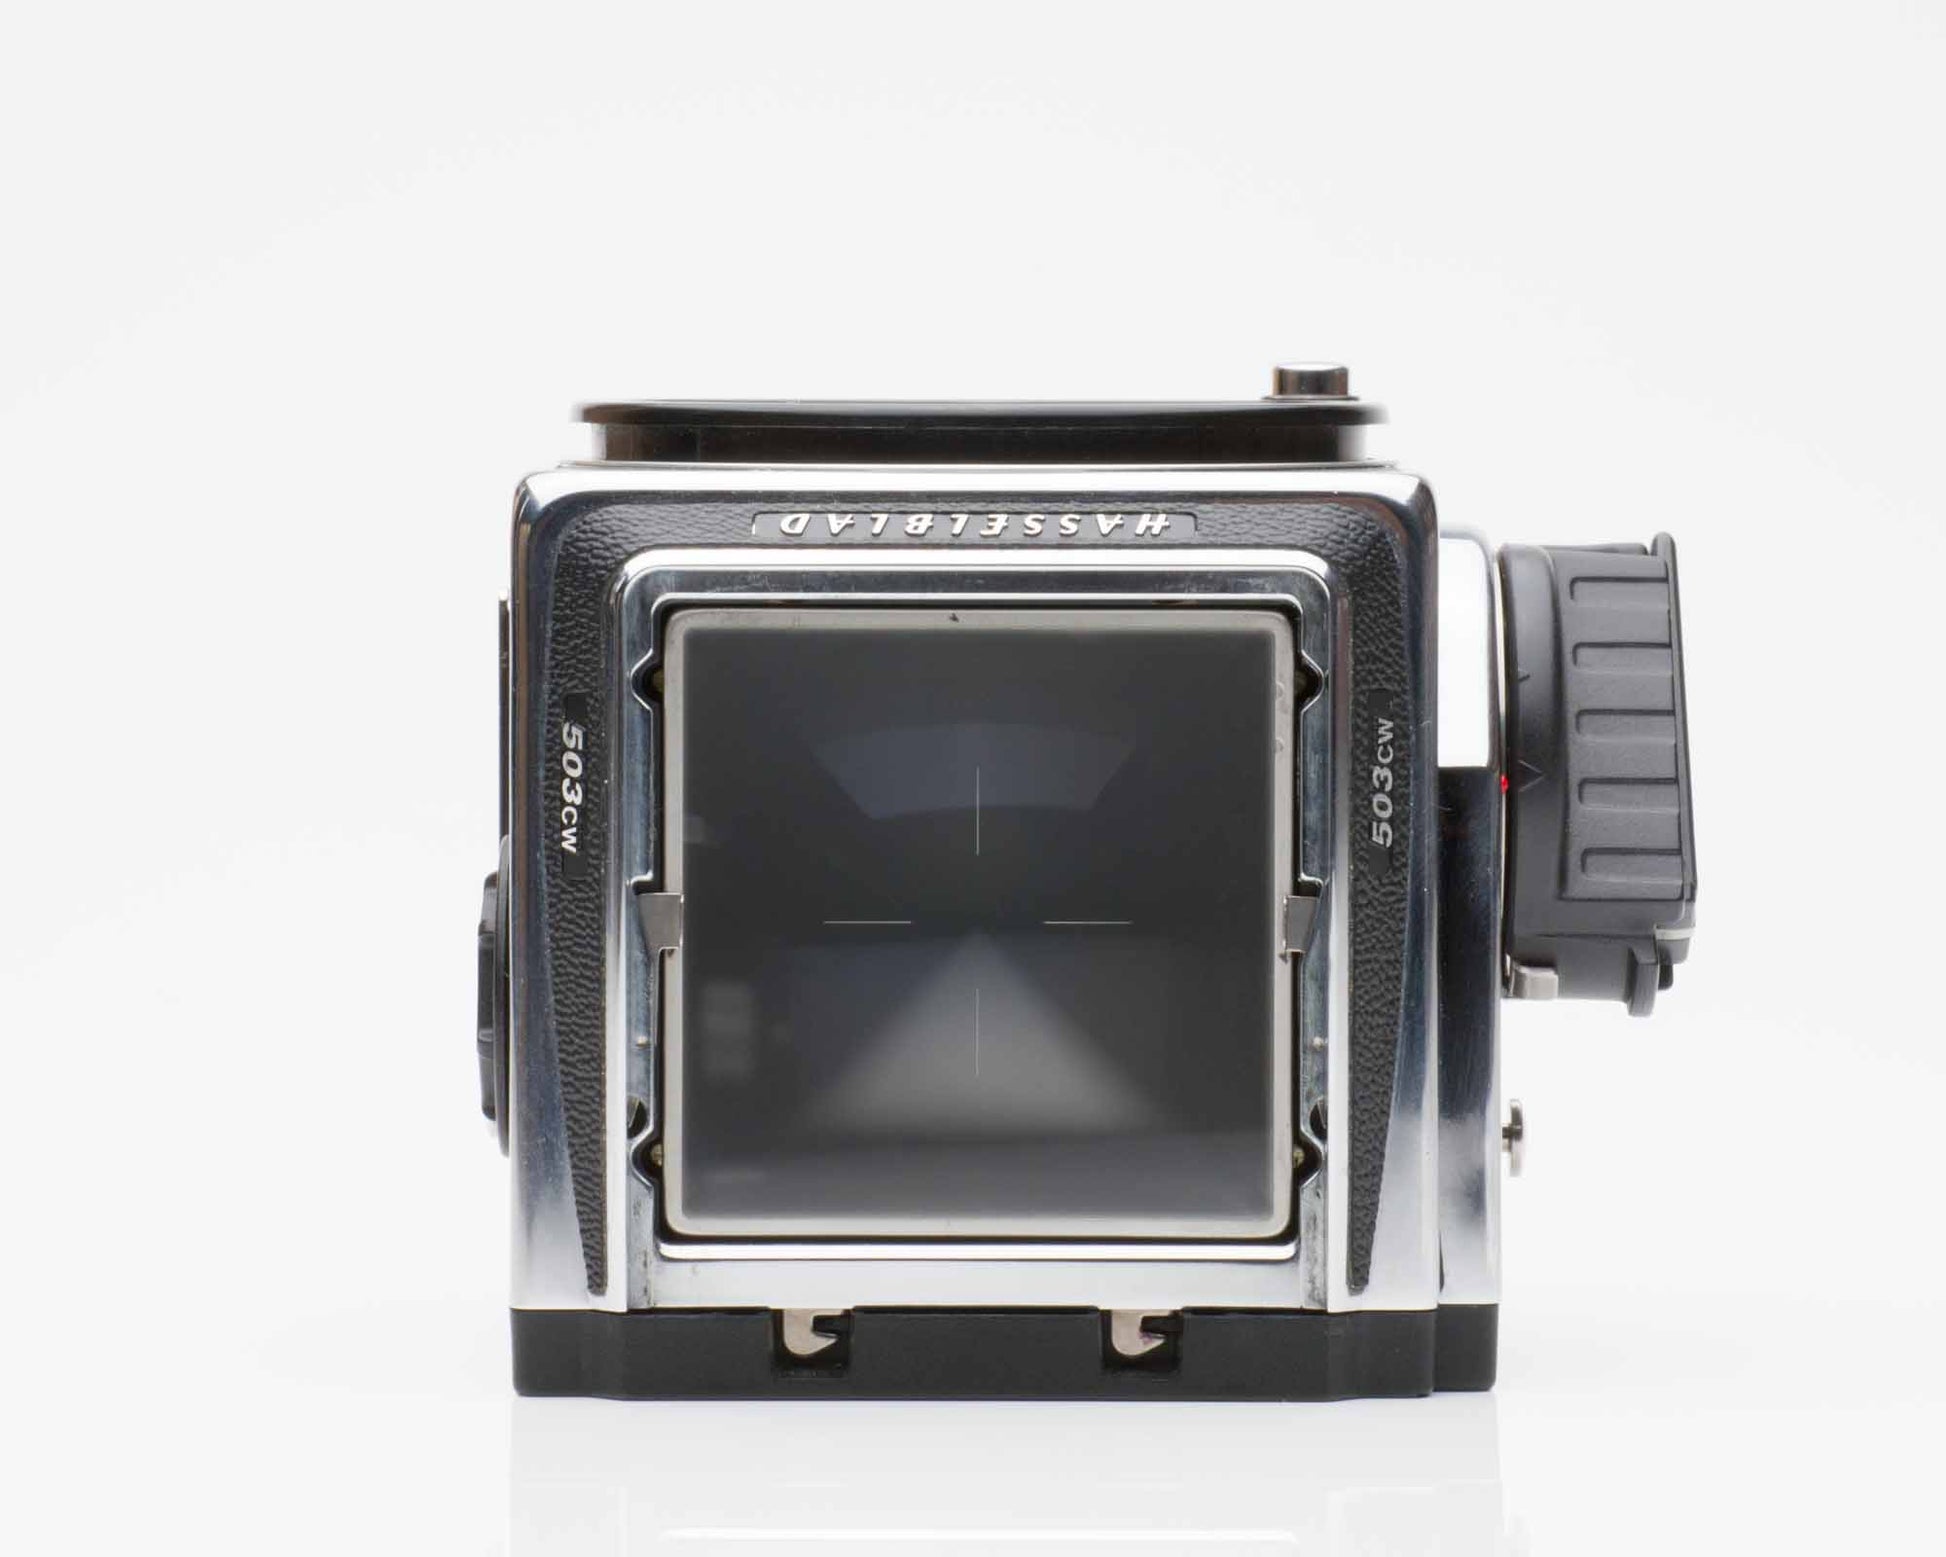 Hasselblad 503CW Chrome Body with Acute Matte D 42204 ISO 3200 